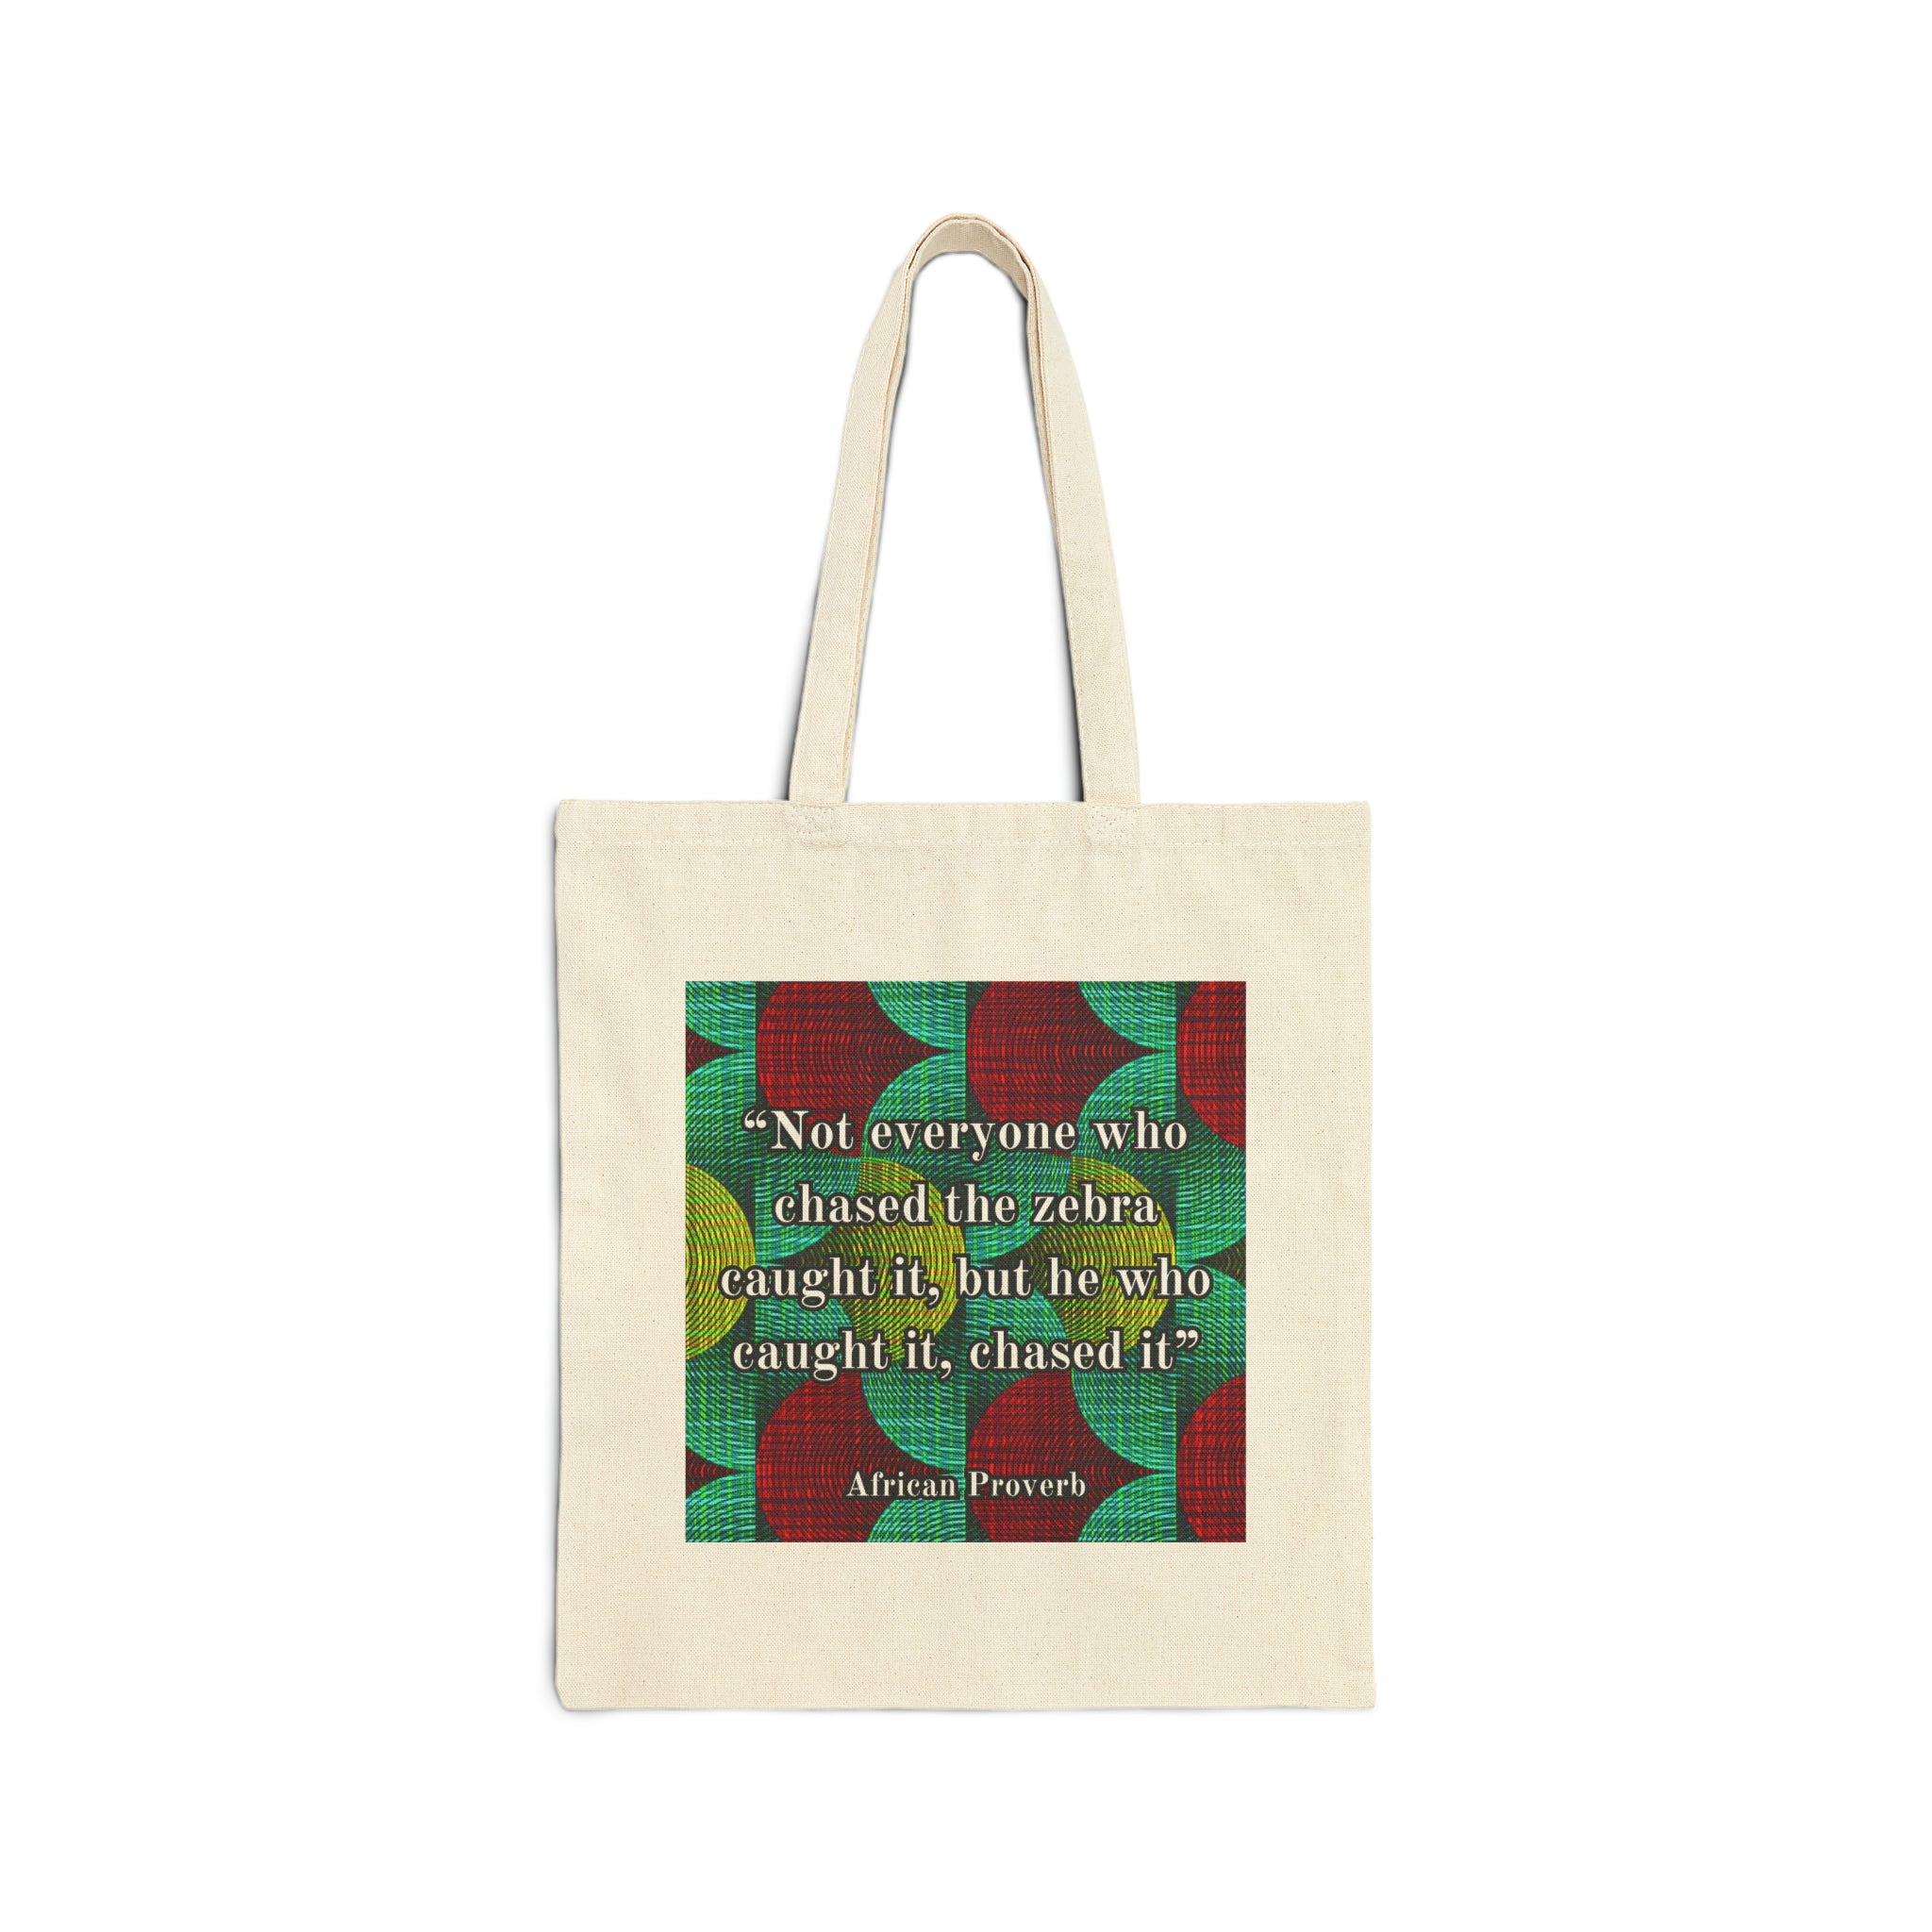 African proverb tote bag - “Not everyone who chased the zebra caught it, but the one who caught it, chased it”